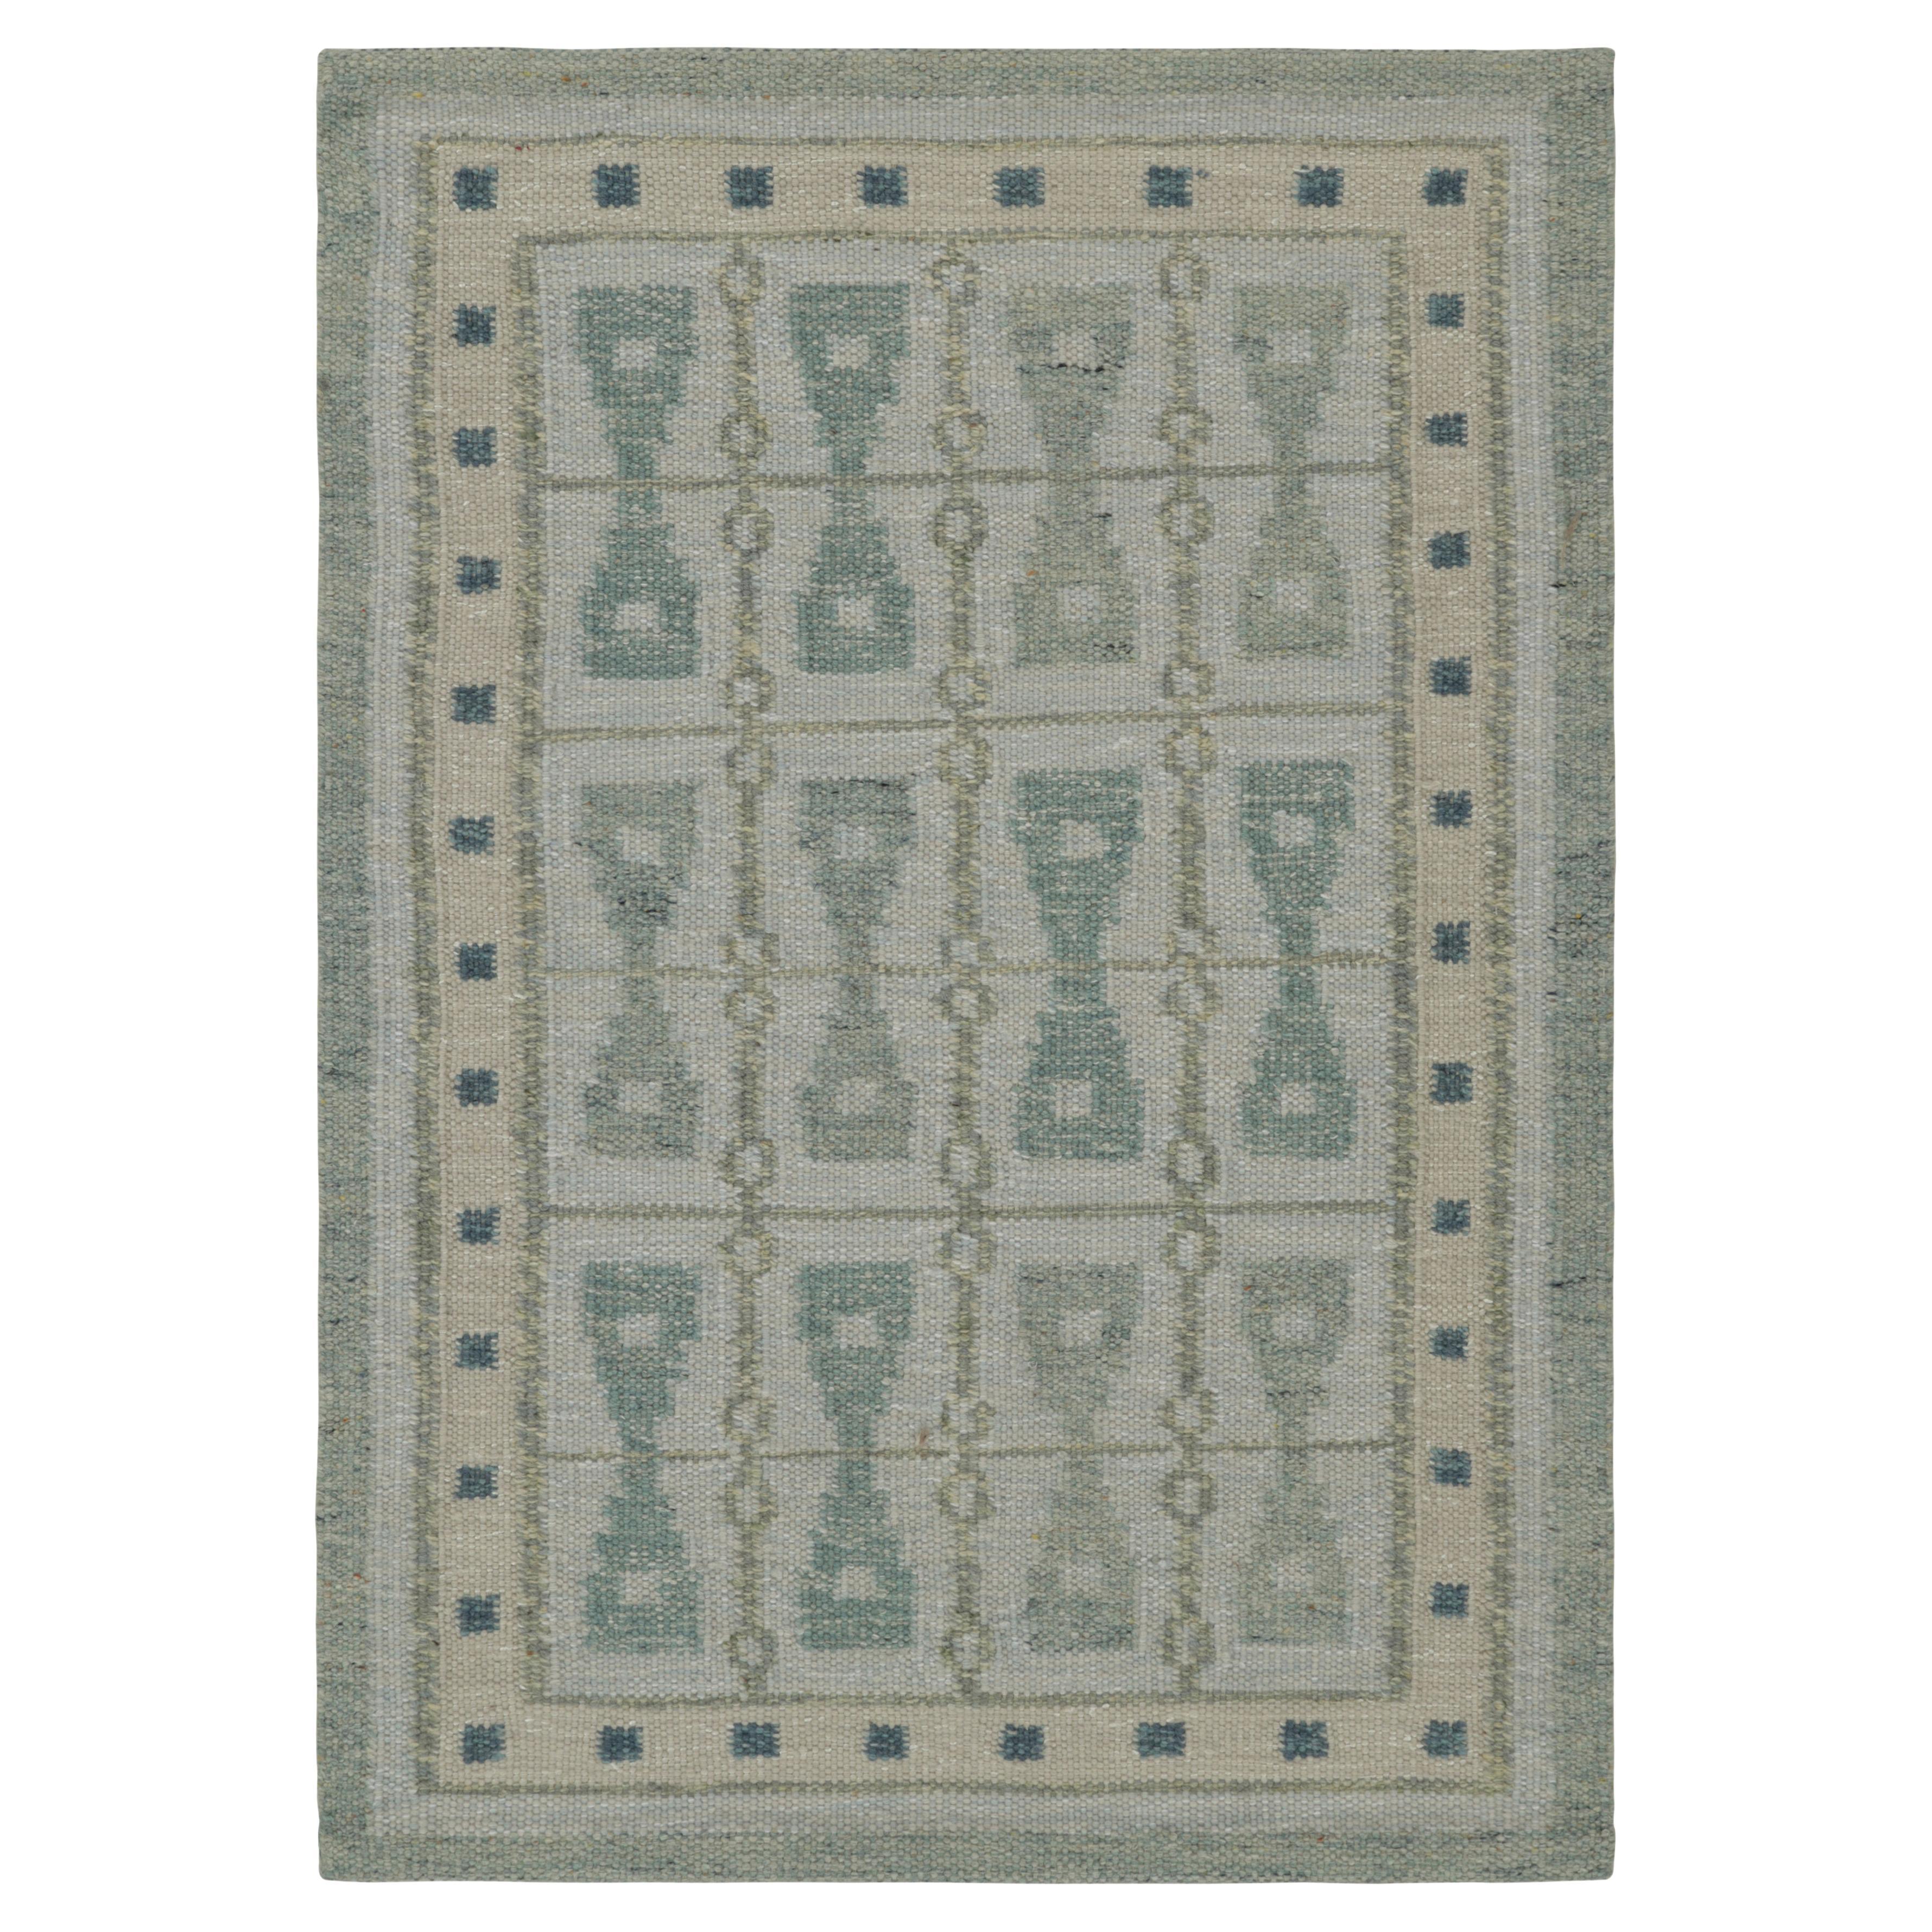 Rug & Kilim’s Scandinavian Style Square Rug in Blue, with Hourglass Patterns